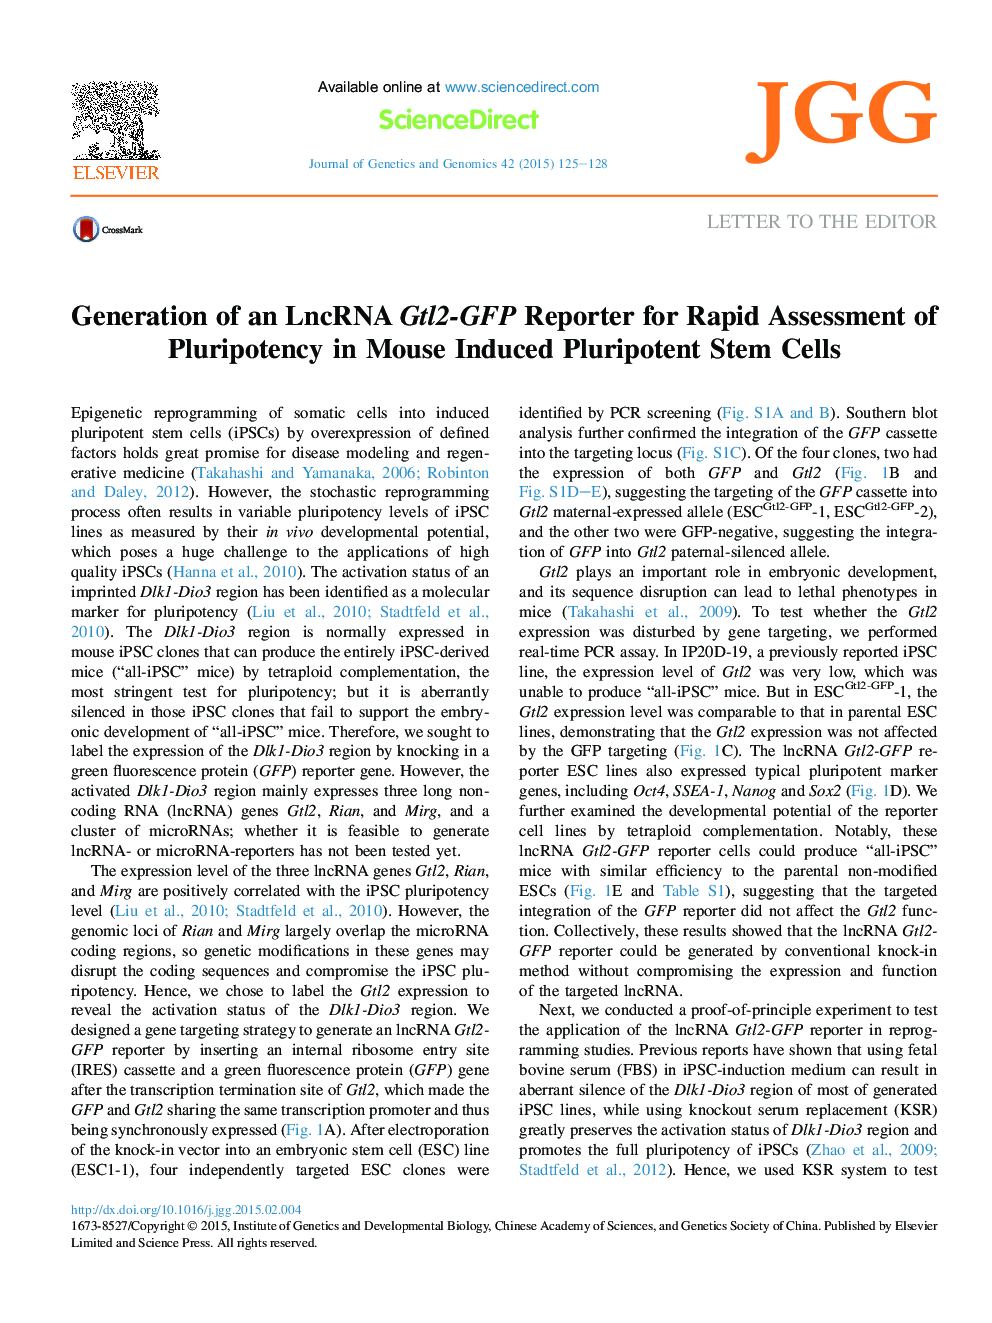 Generation of an LncRNA Gtl2-GFP Reporter for Rapid Assessment of Pluripotency in Mouse Induced Pluripotent Stem Cells